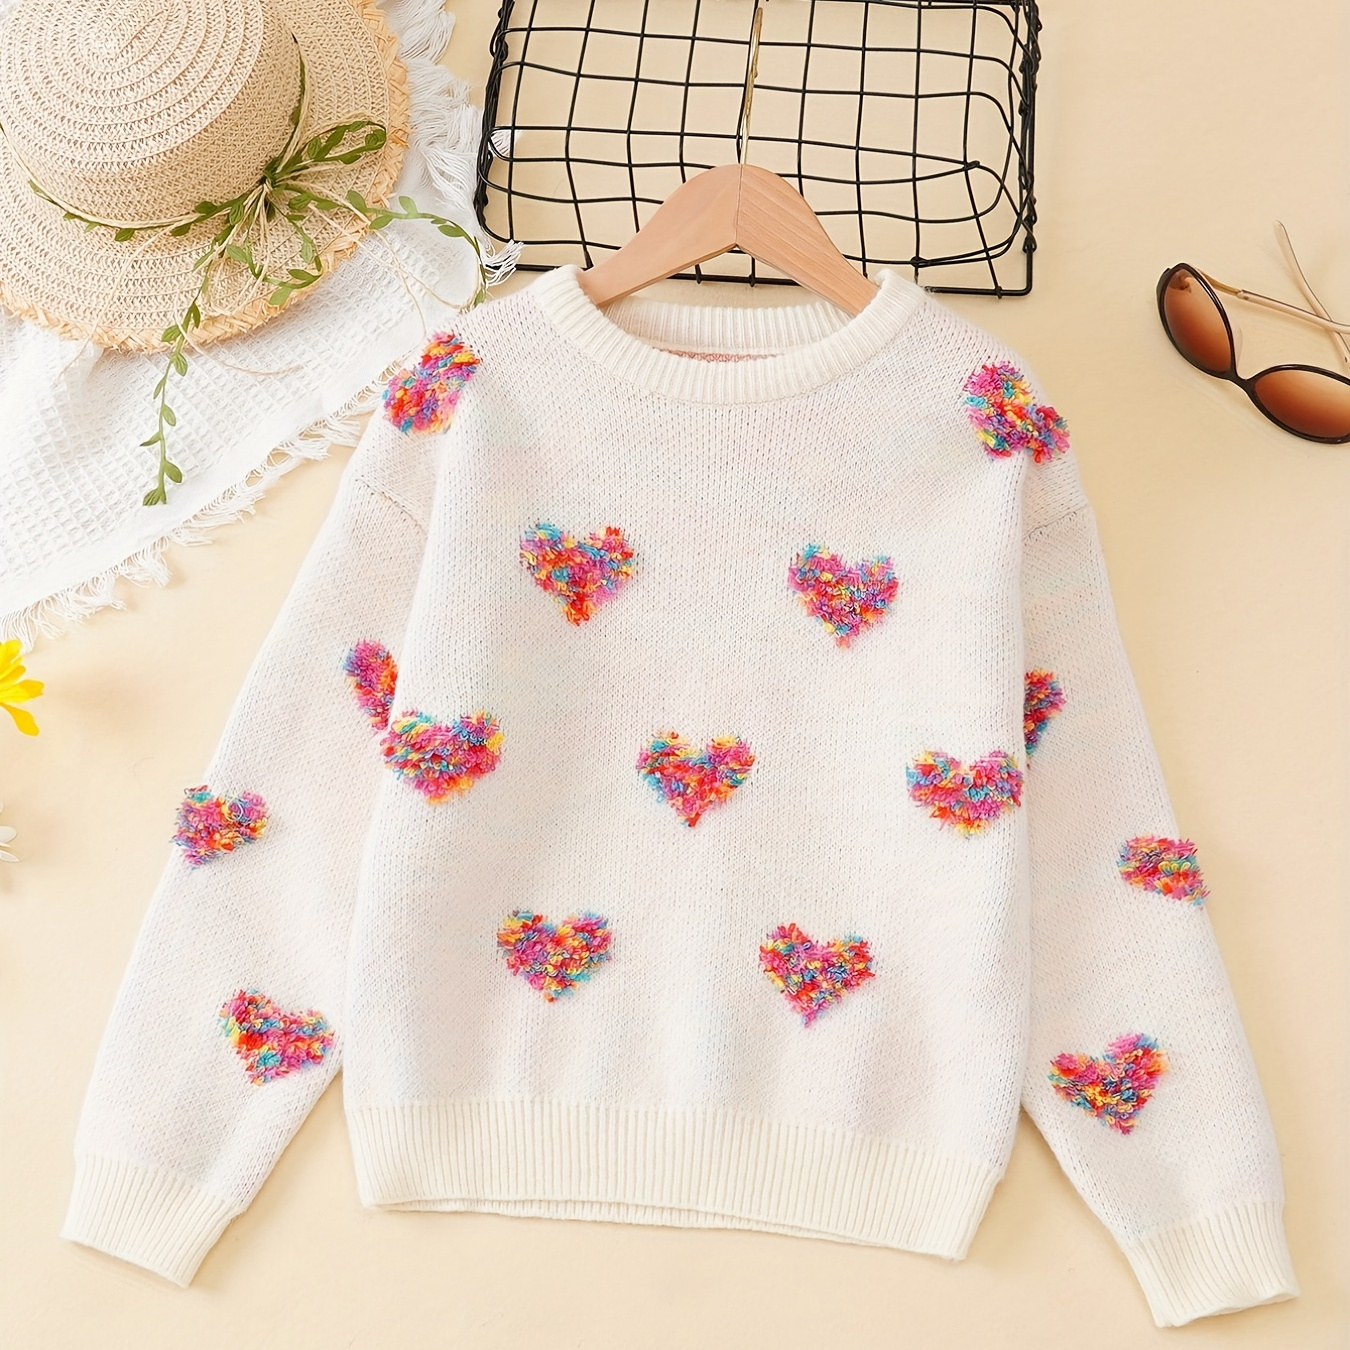 

Girls Knitted Heart Jacquard Pattern Round Neck Sweater Sweet Cute Pullover Jumper